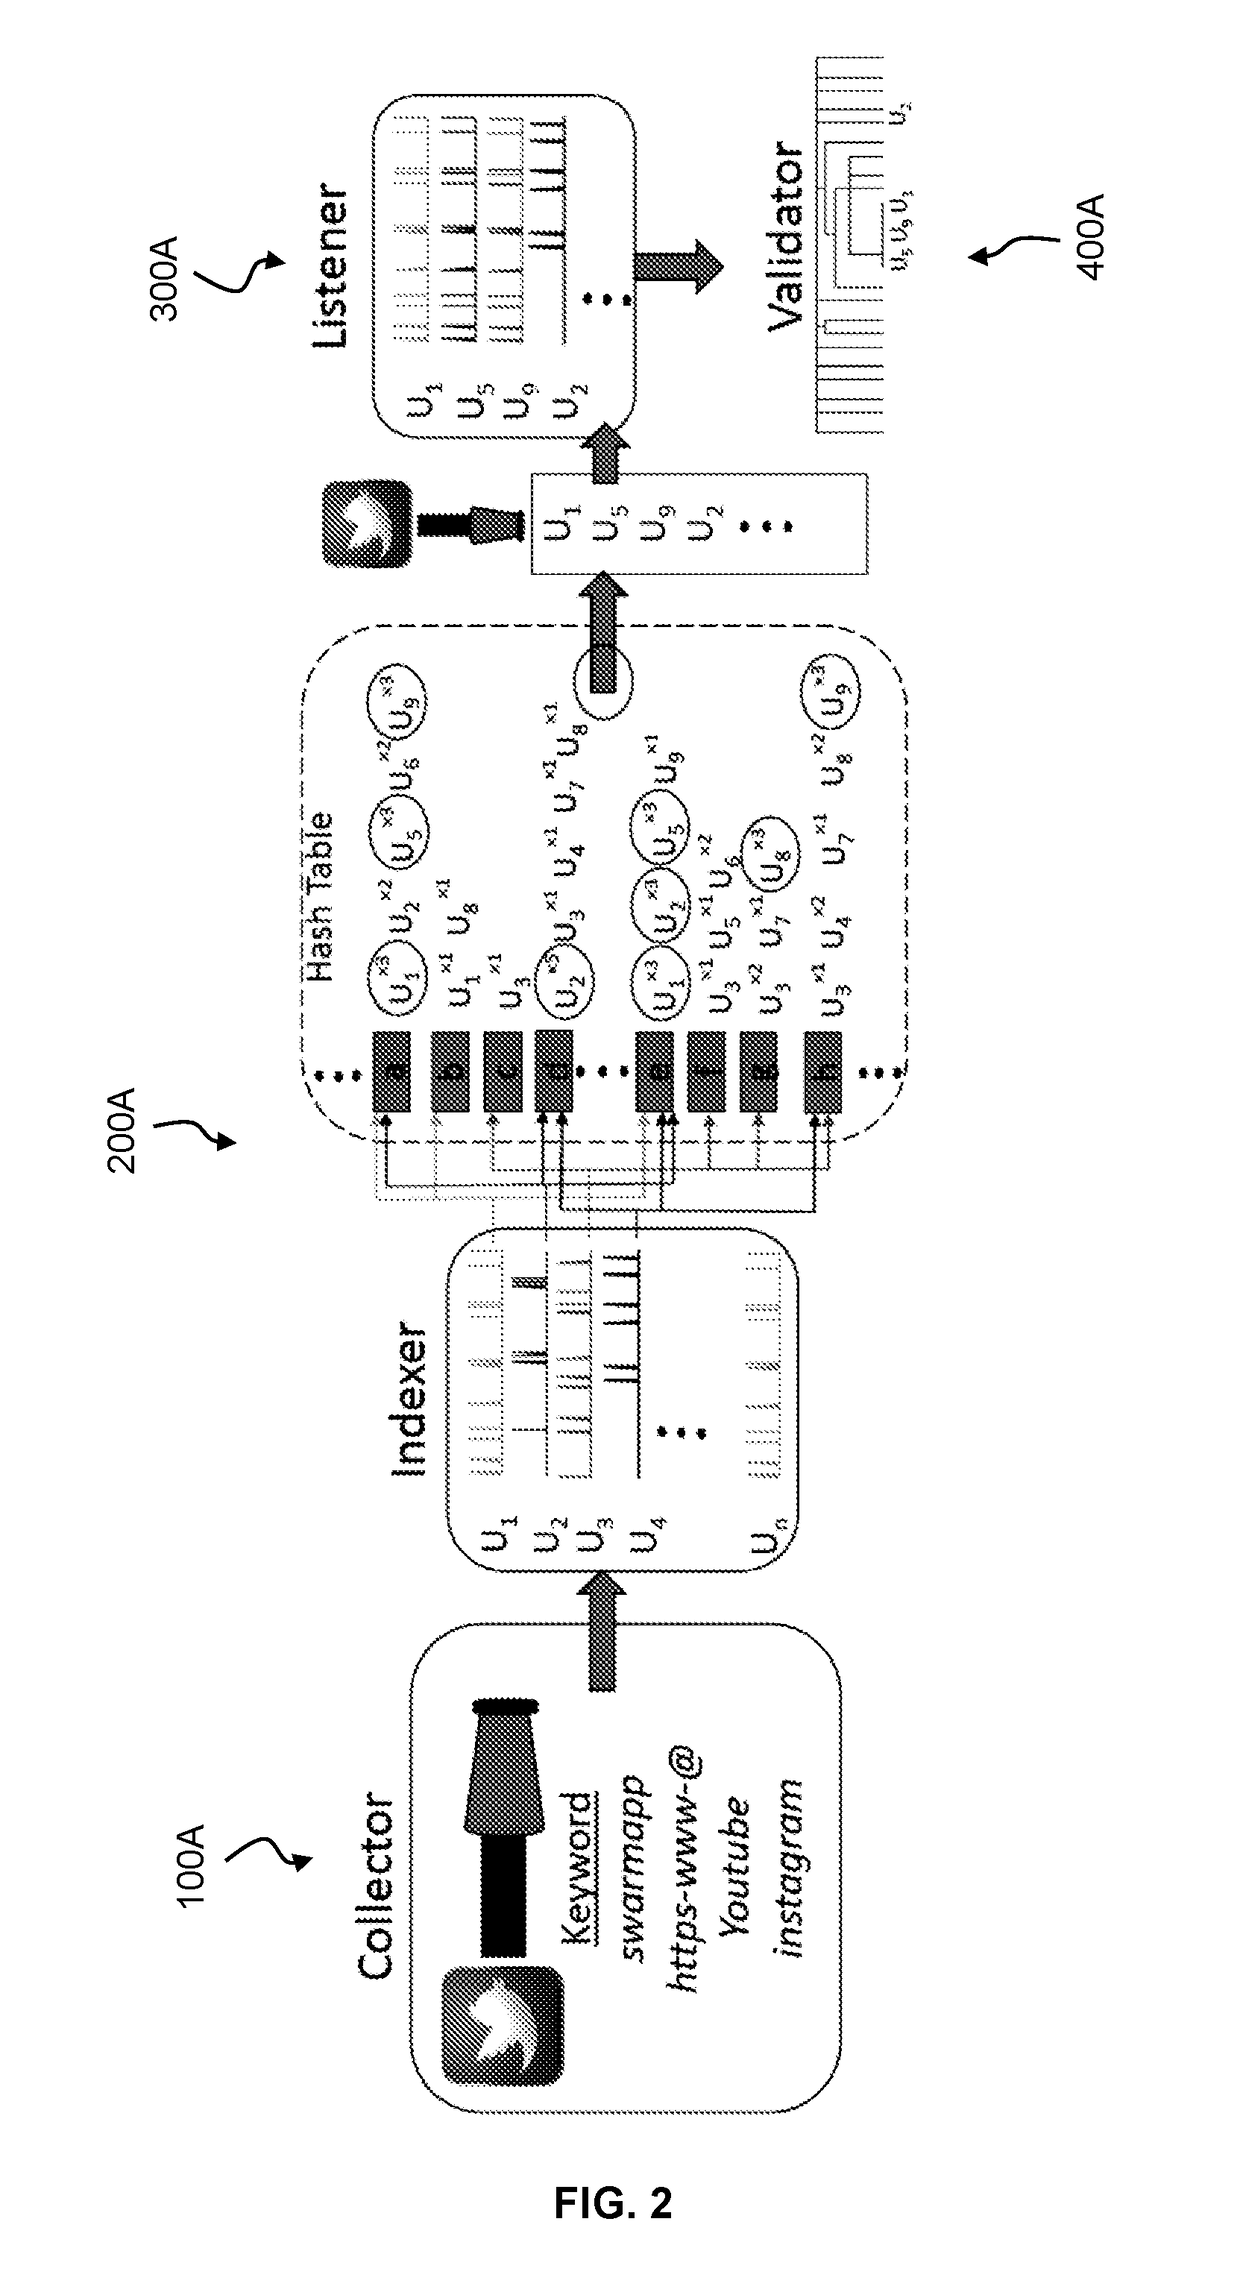 System and methods for detecting bots real-time